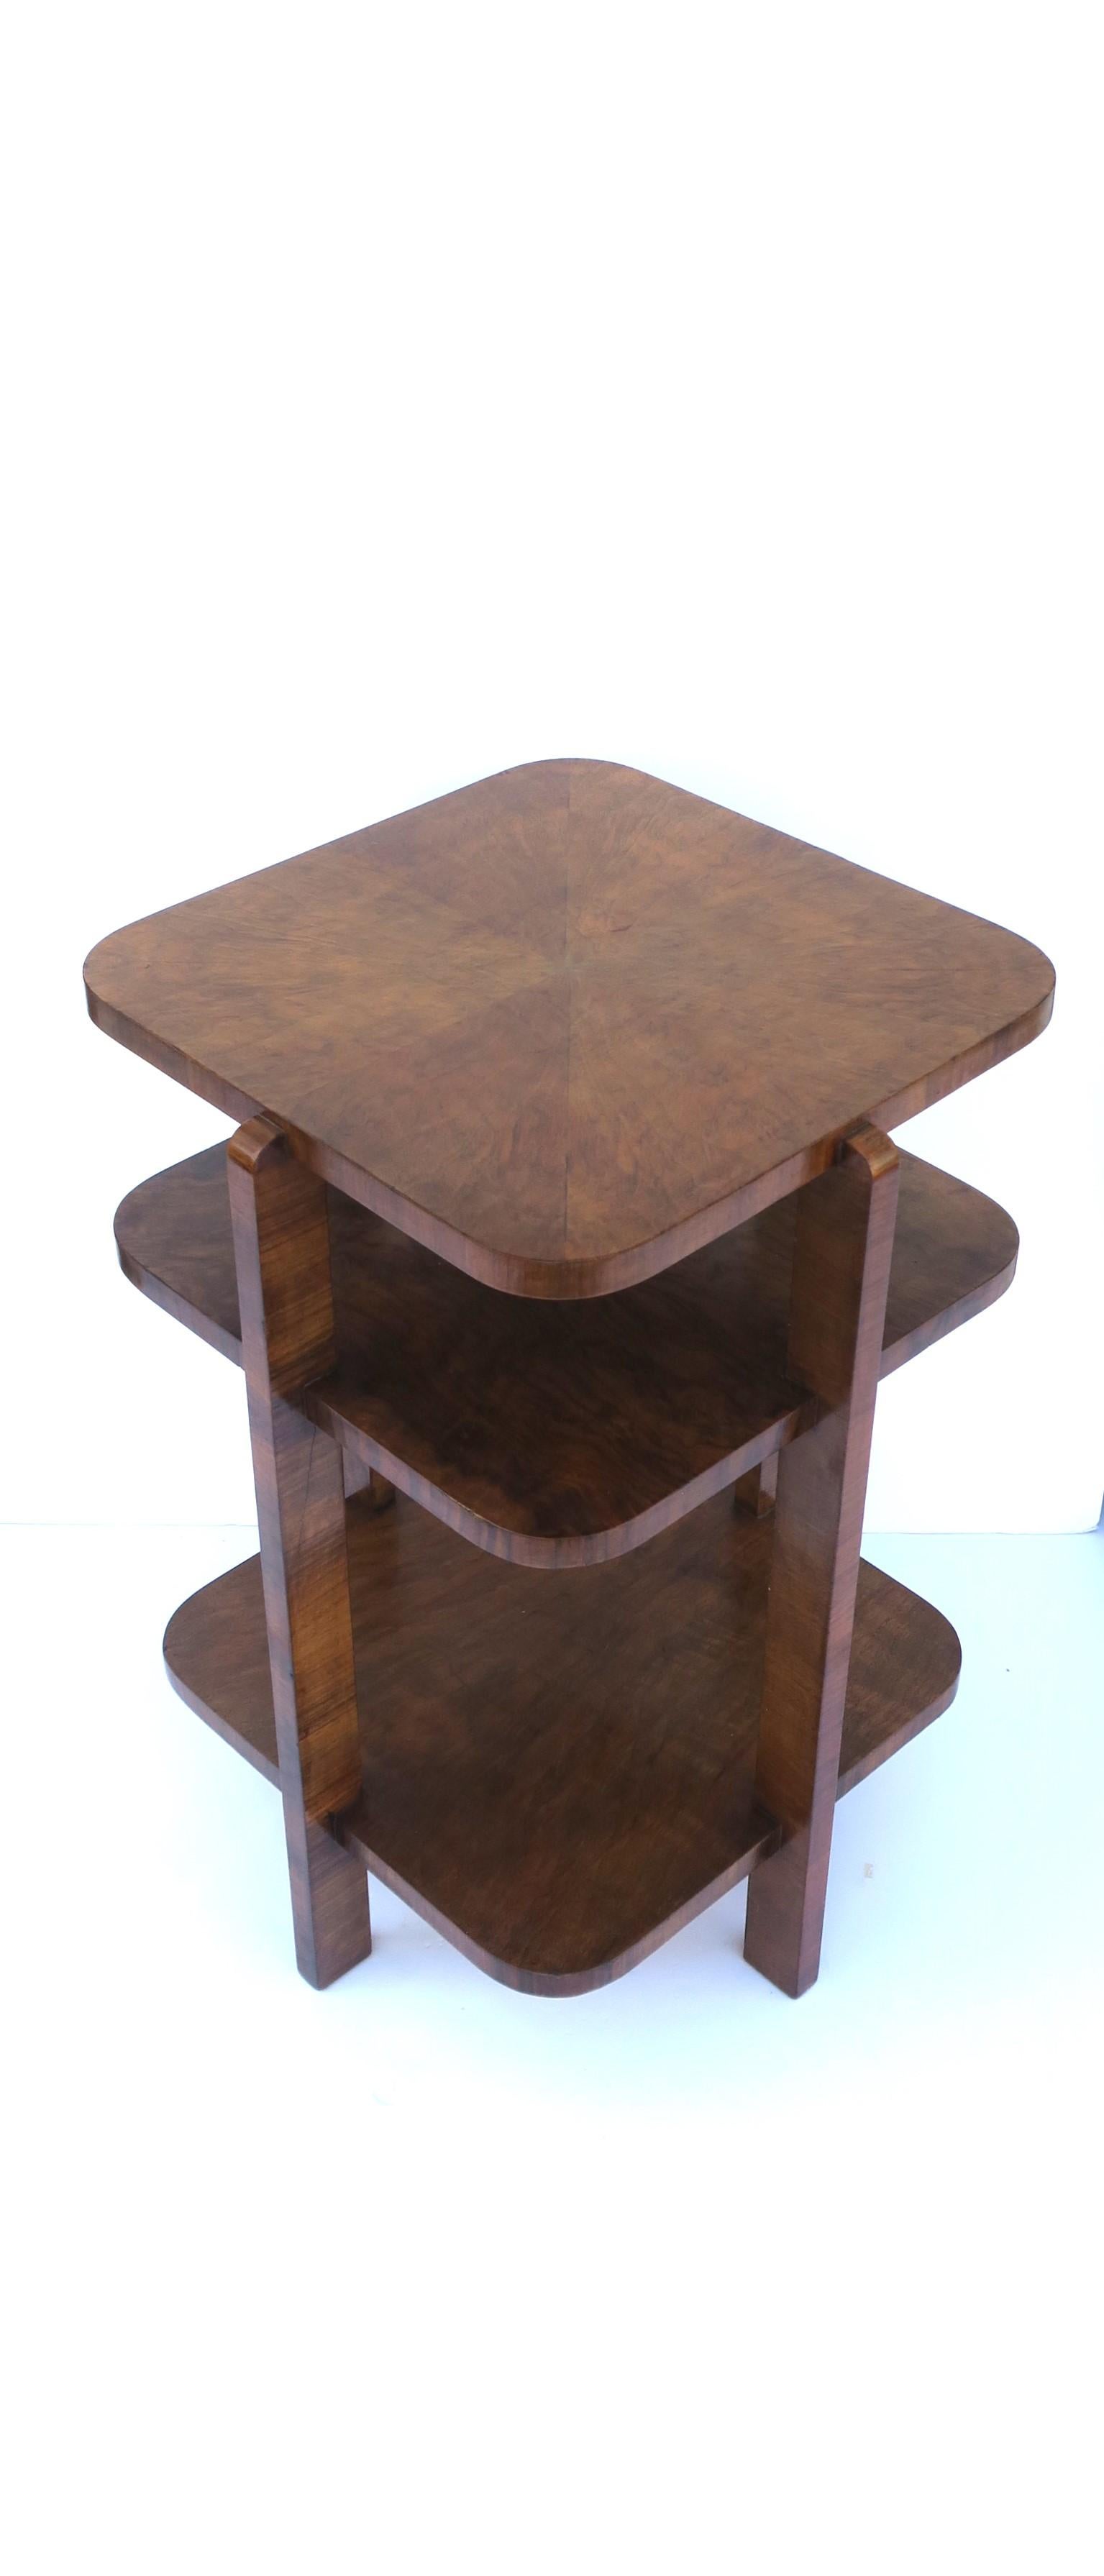 A rich tiger maple wood veneered wood drinks/side/end table with shelves, in the Art Deco style, circa mid-20th century, Europe. In addition to table's top, table has two shelves that can hold or display items as shown. Table is a nice size, not too